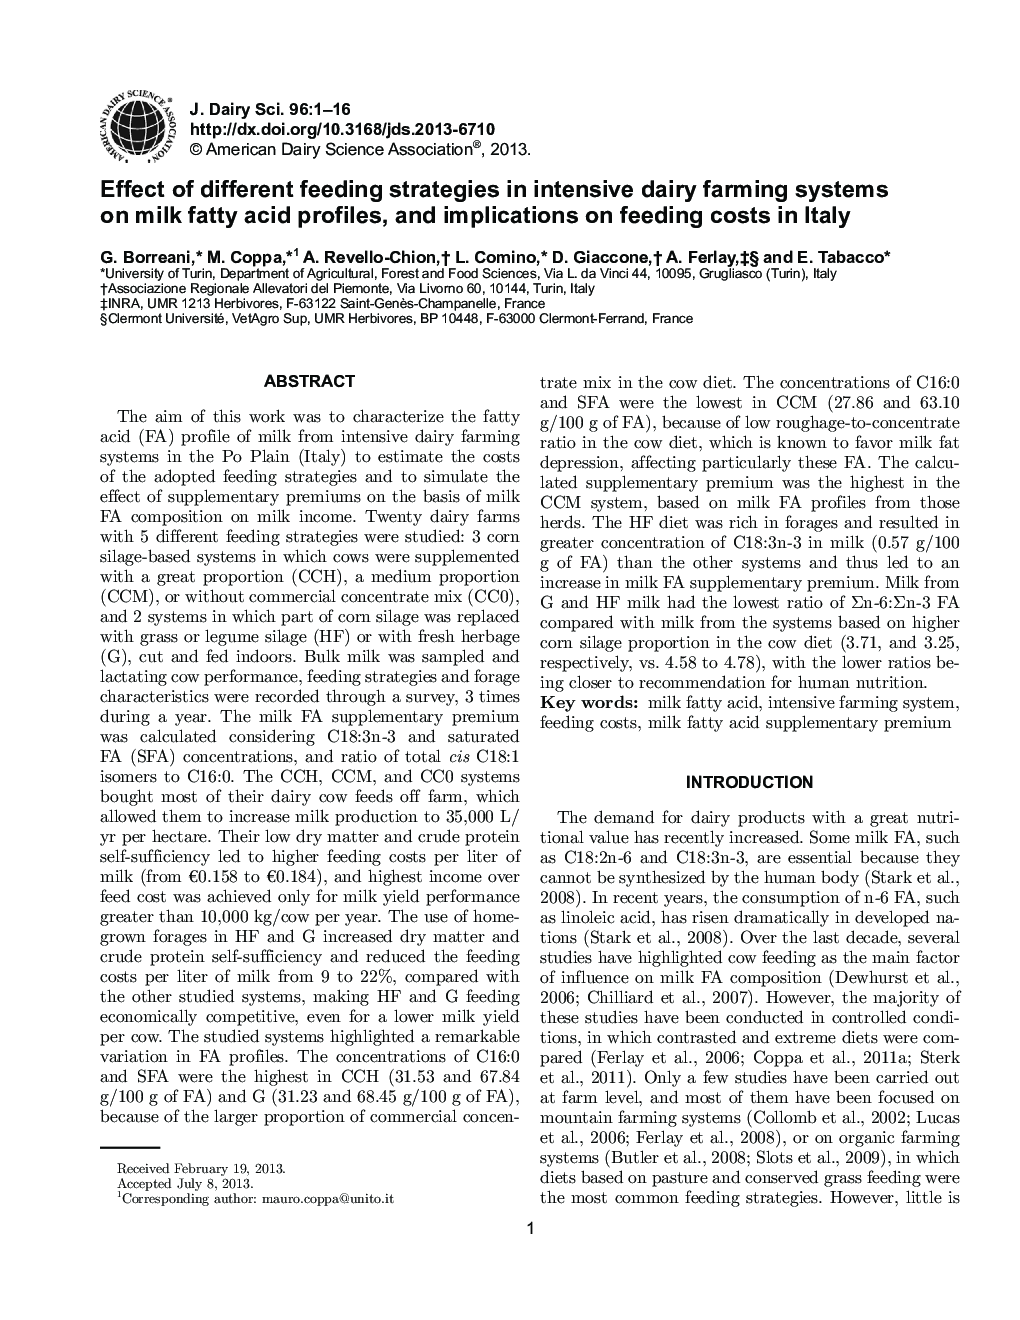 Effect of different feeding strategies in intensive dairy farming systems on milk fatty acid profiles, and implications on feeding costs in Italy